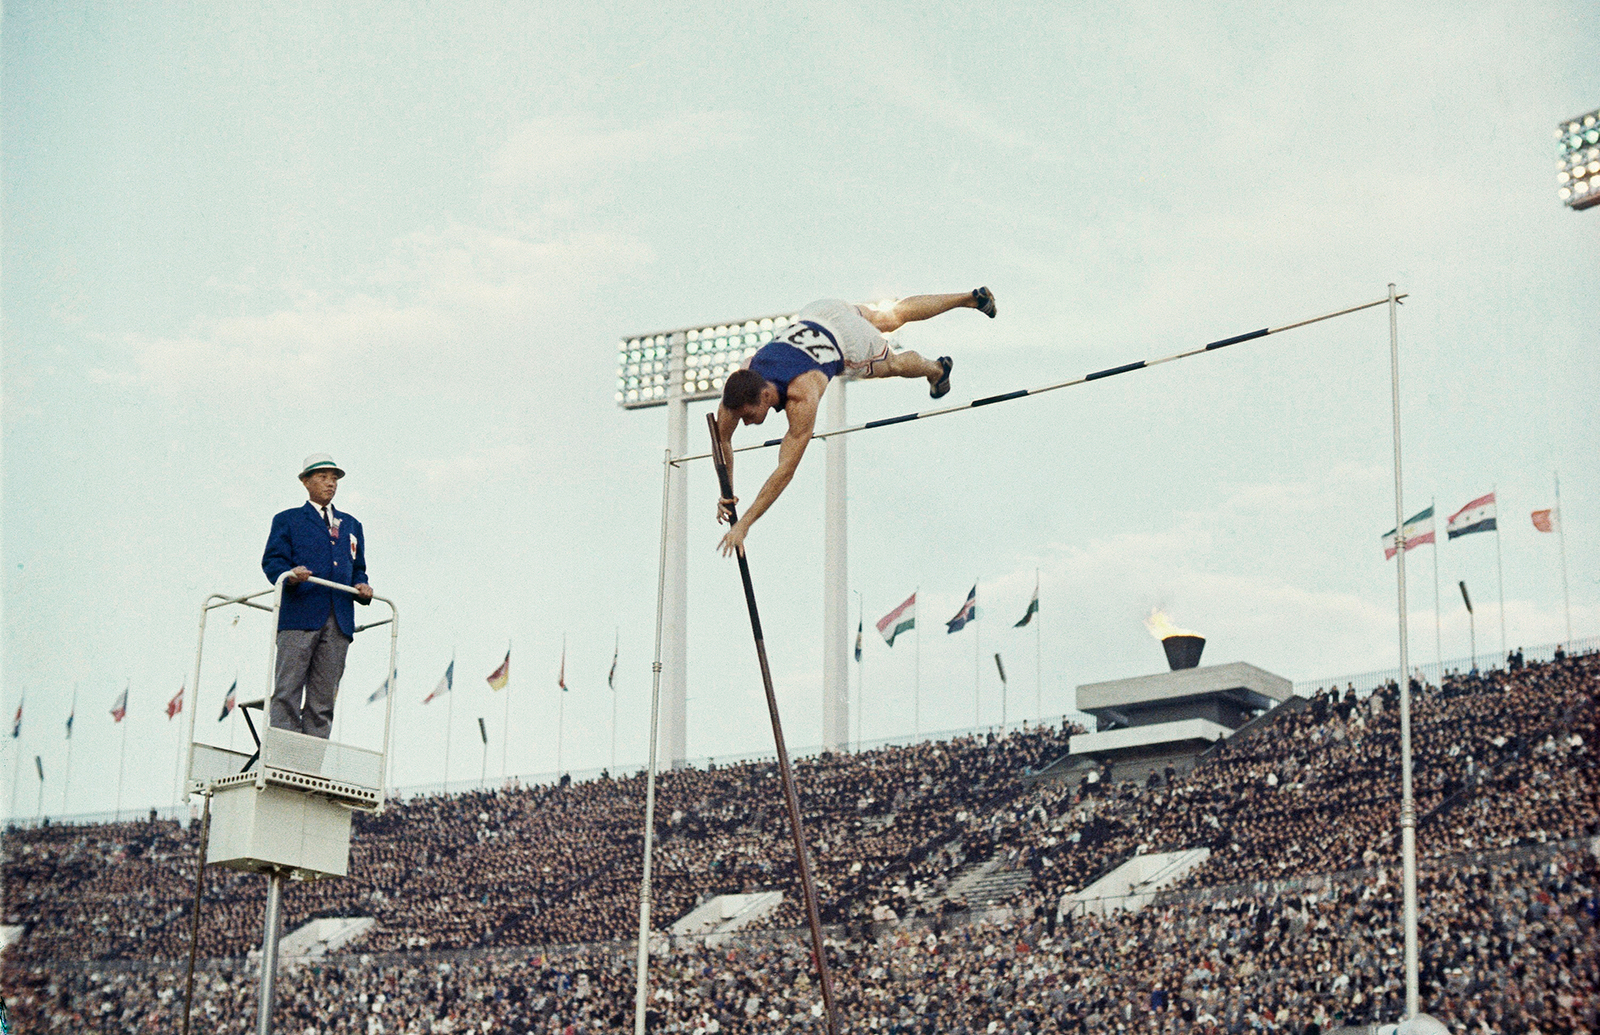 A pole vaulter clears the bar during competition.